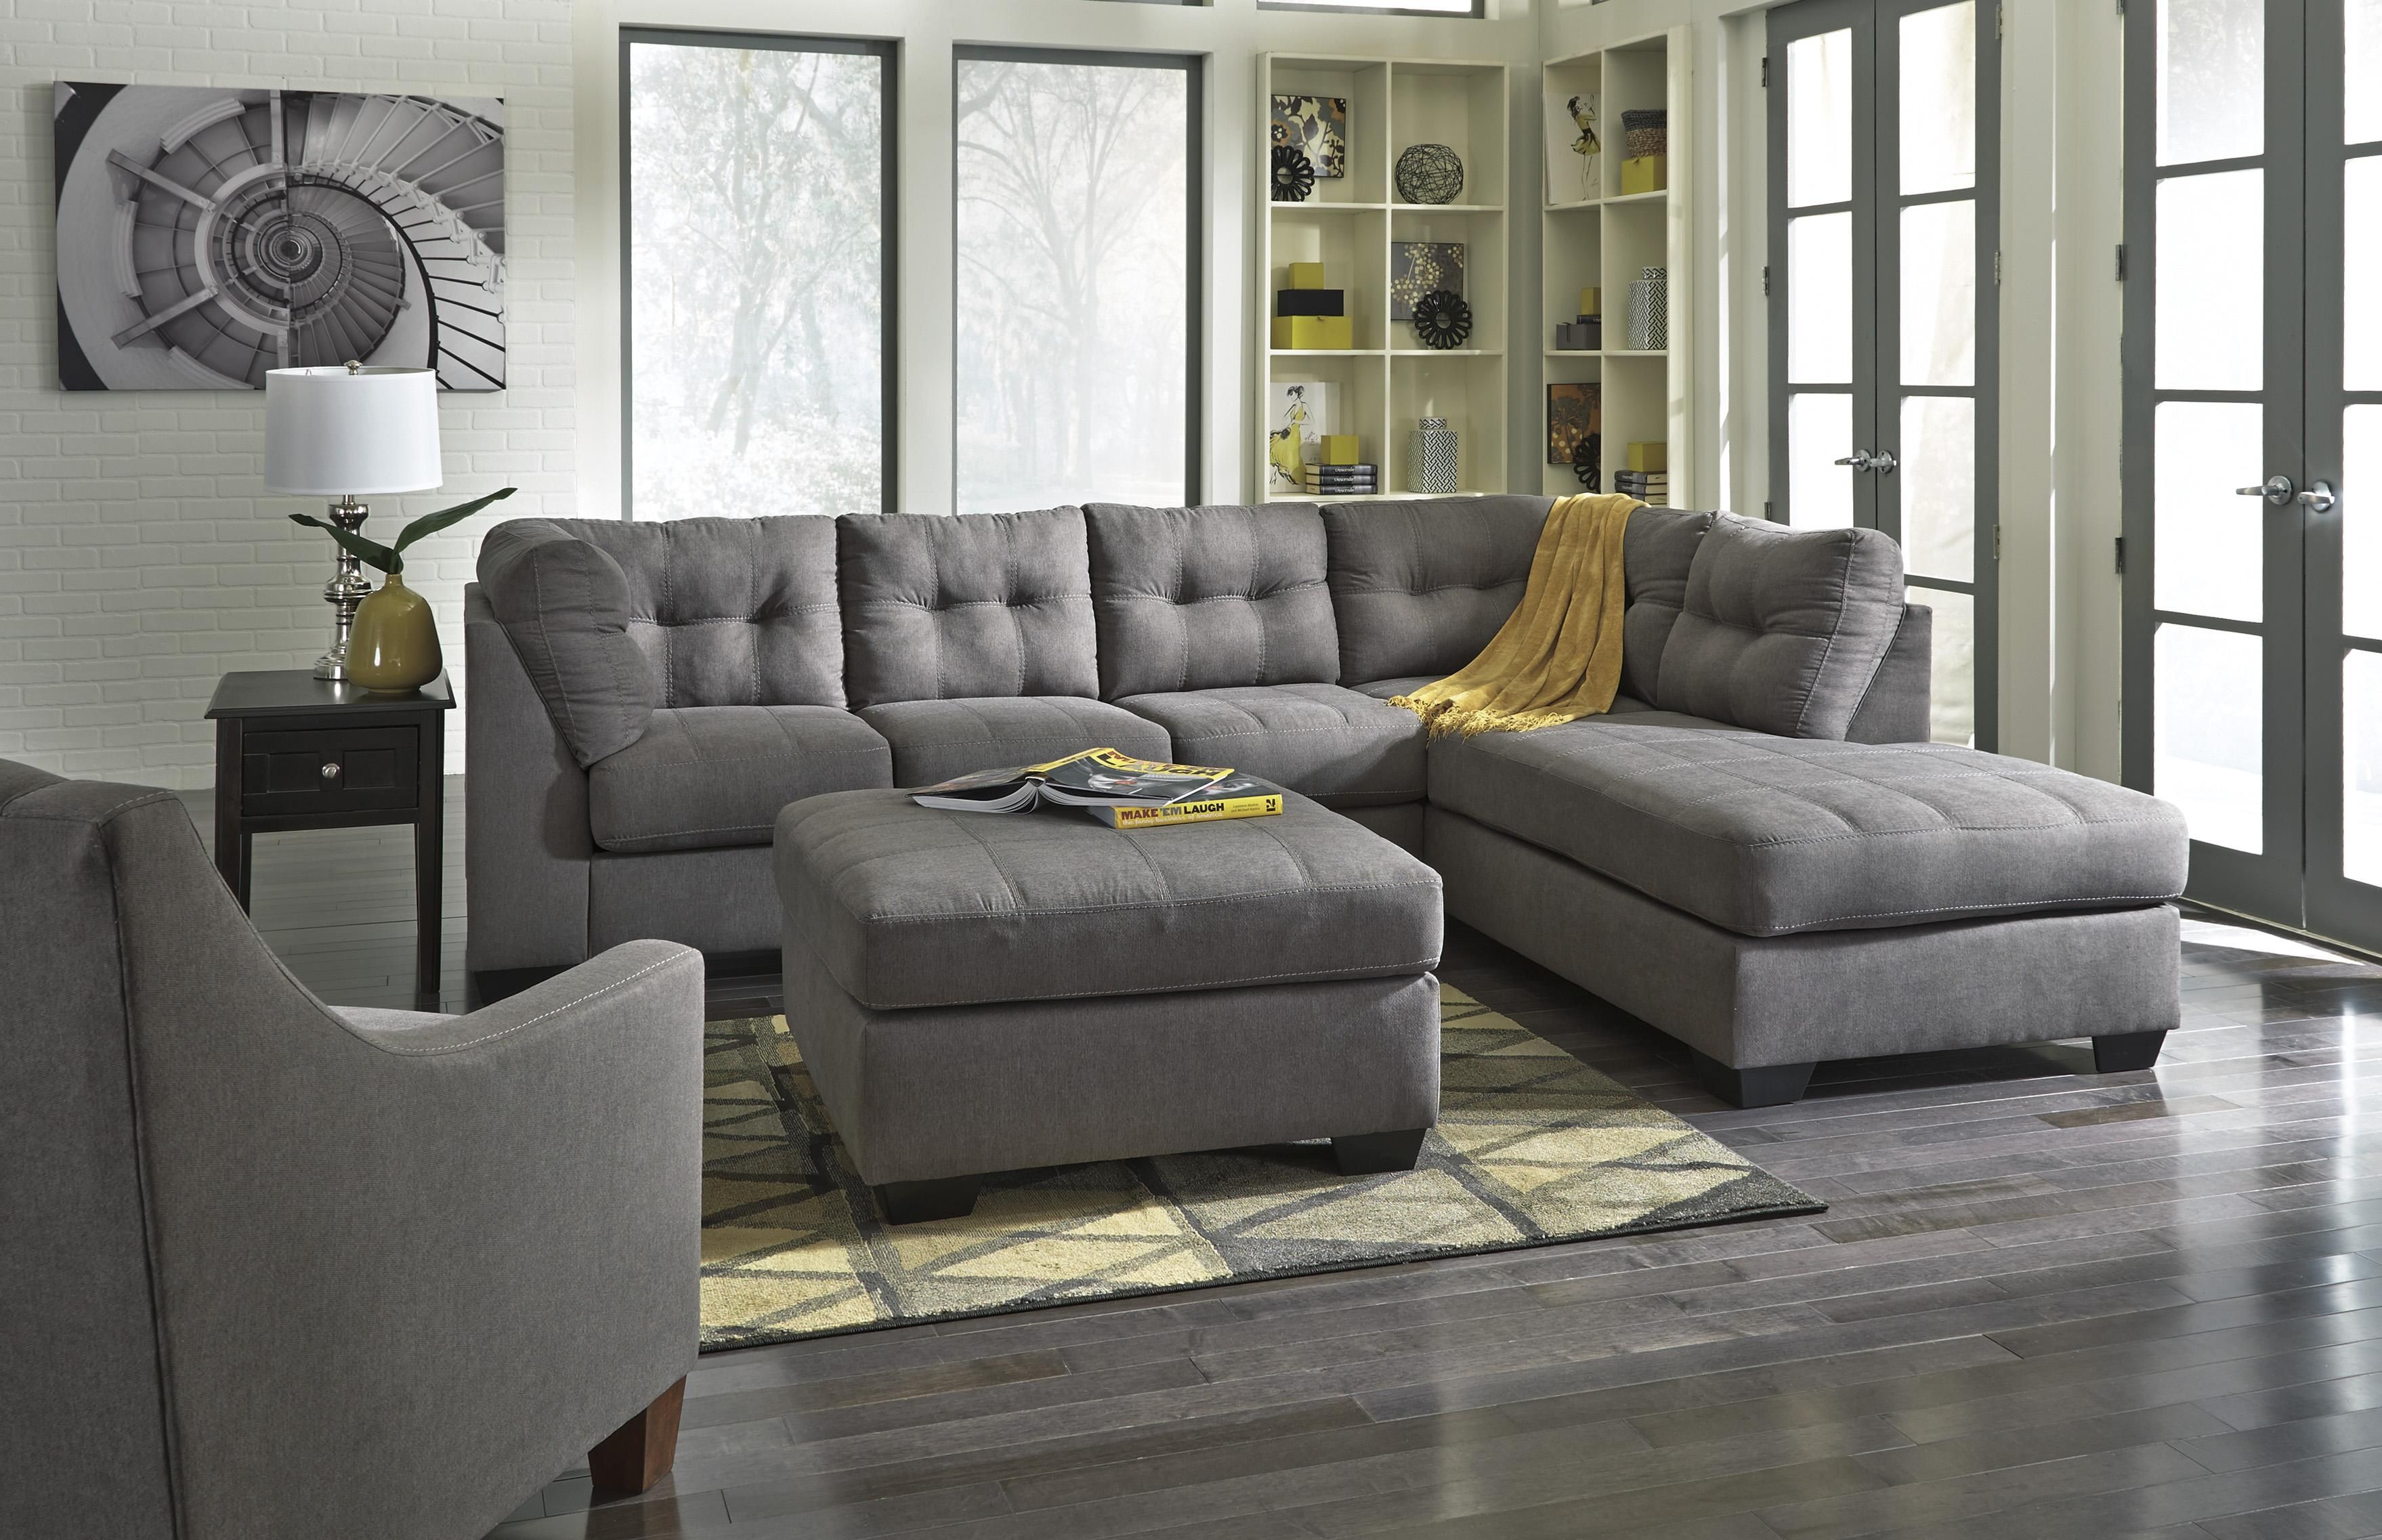 Decor Fascinating Benchcraft Sofa With Luxury Shapes For Living Intended For Berkline Sectional Sofa (View 12 of 12)